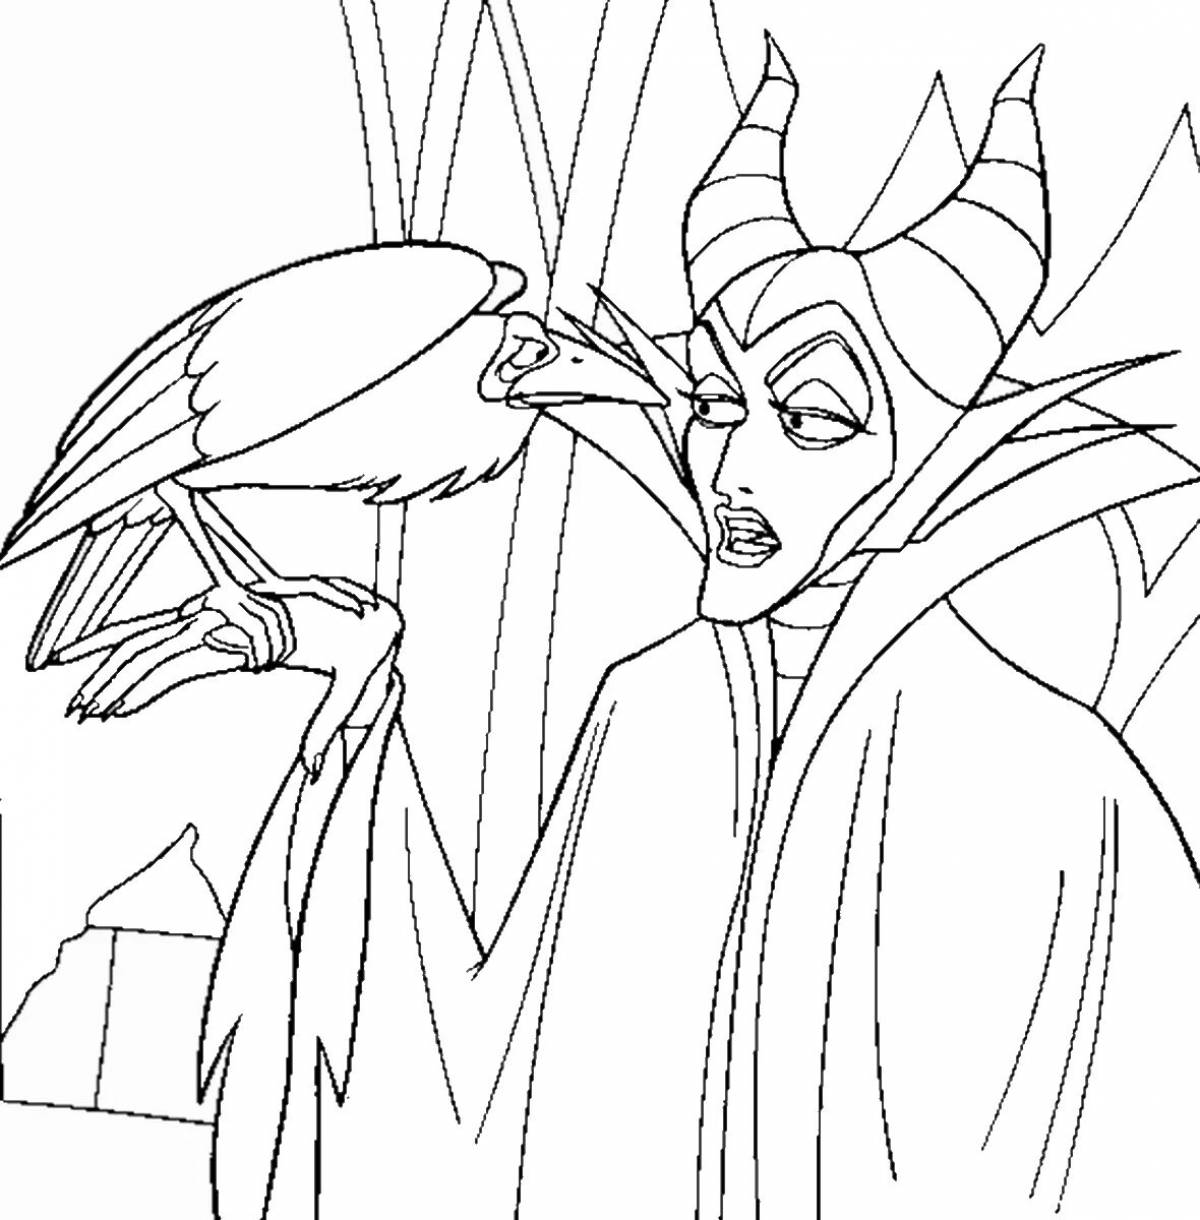 Maleficent for kids #9